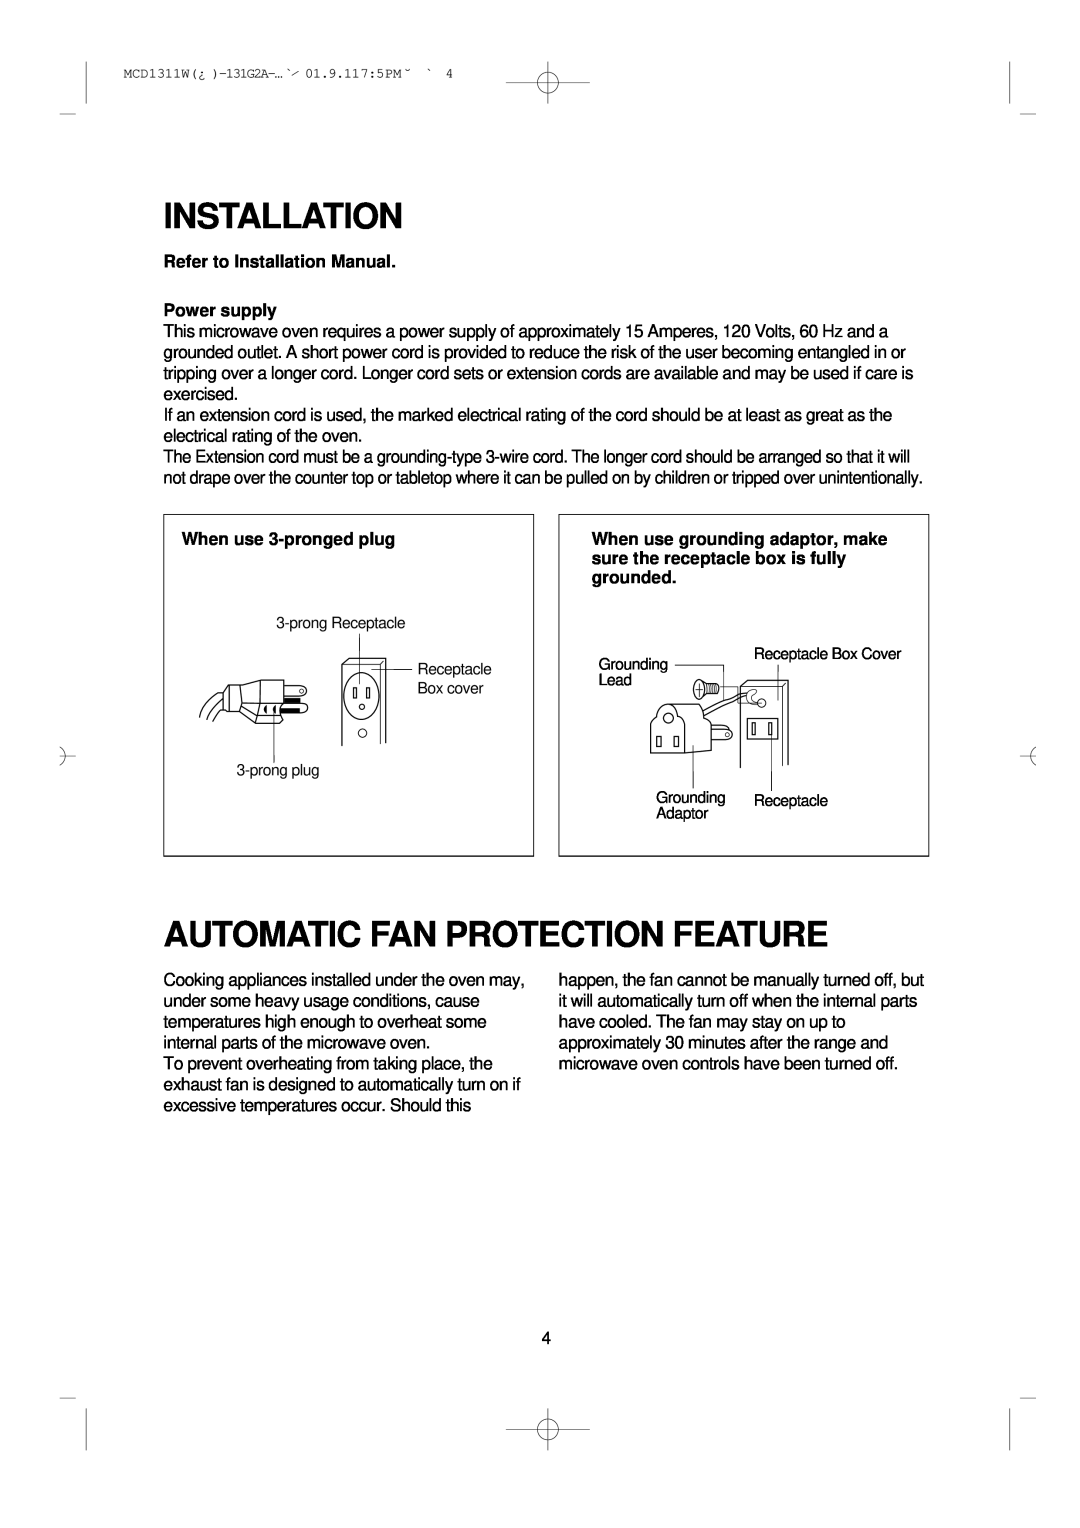 Magic Chef MCD1311W instruction manual Automatic Fan Protection Feature, Refer to Installation Manual Power supply 